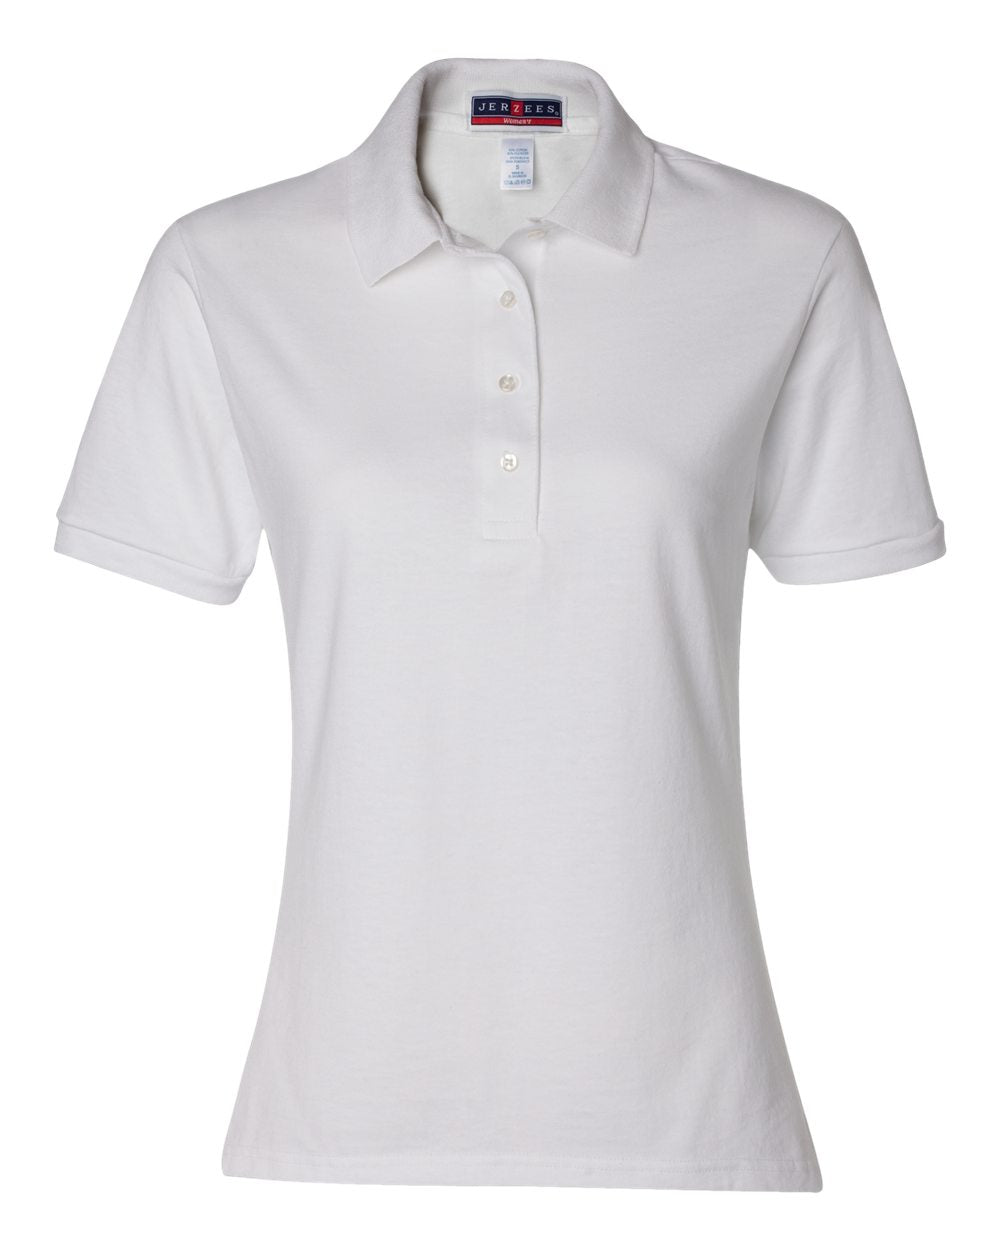 womans jerzees 50/50 polo white